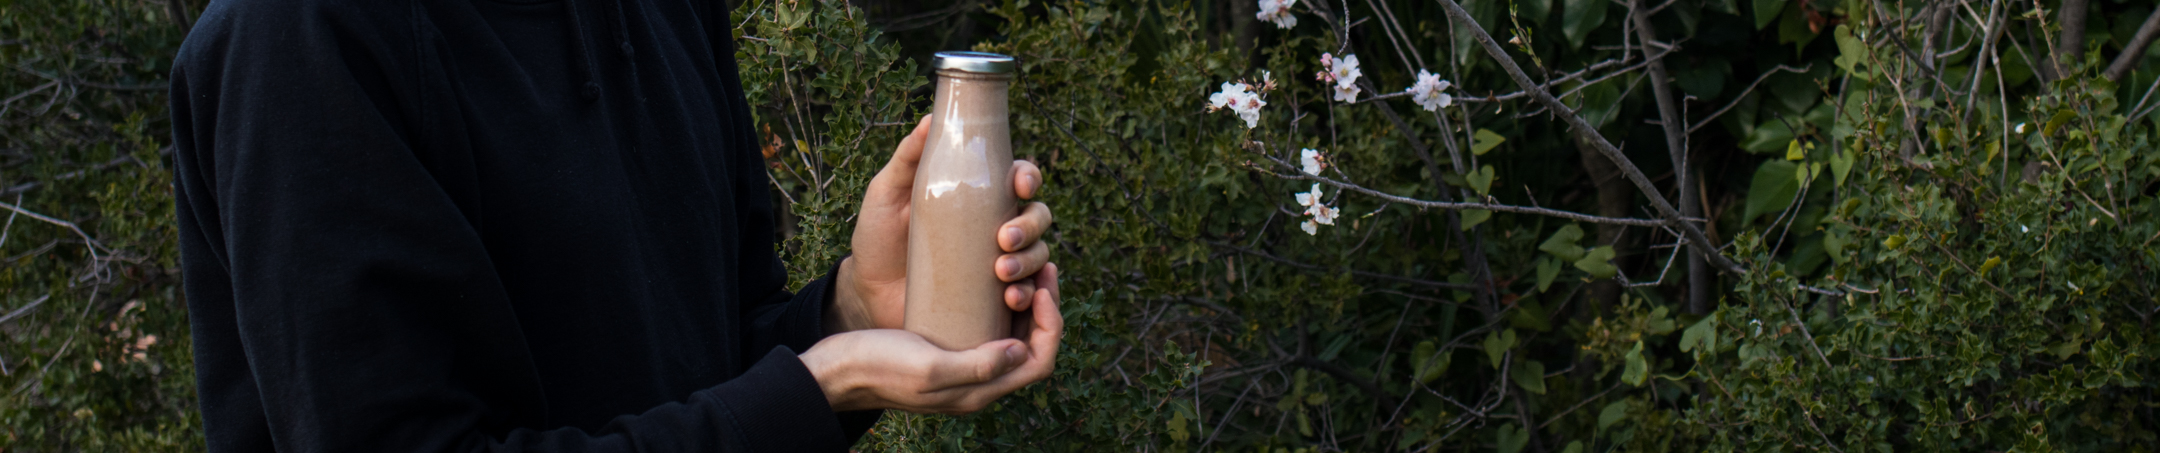 What are some good non-dairy vegan substitutes for milk? homemade chocolate milk vegan raw with hemp